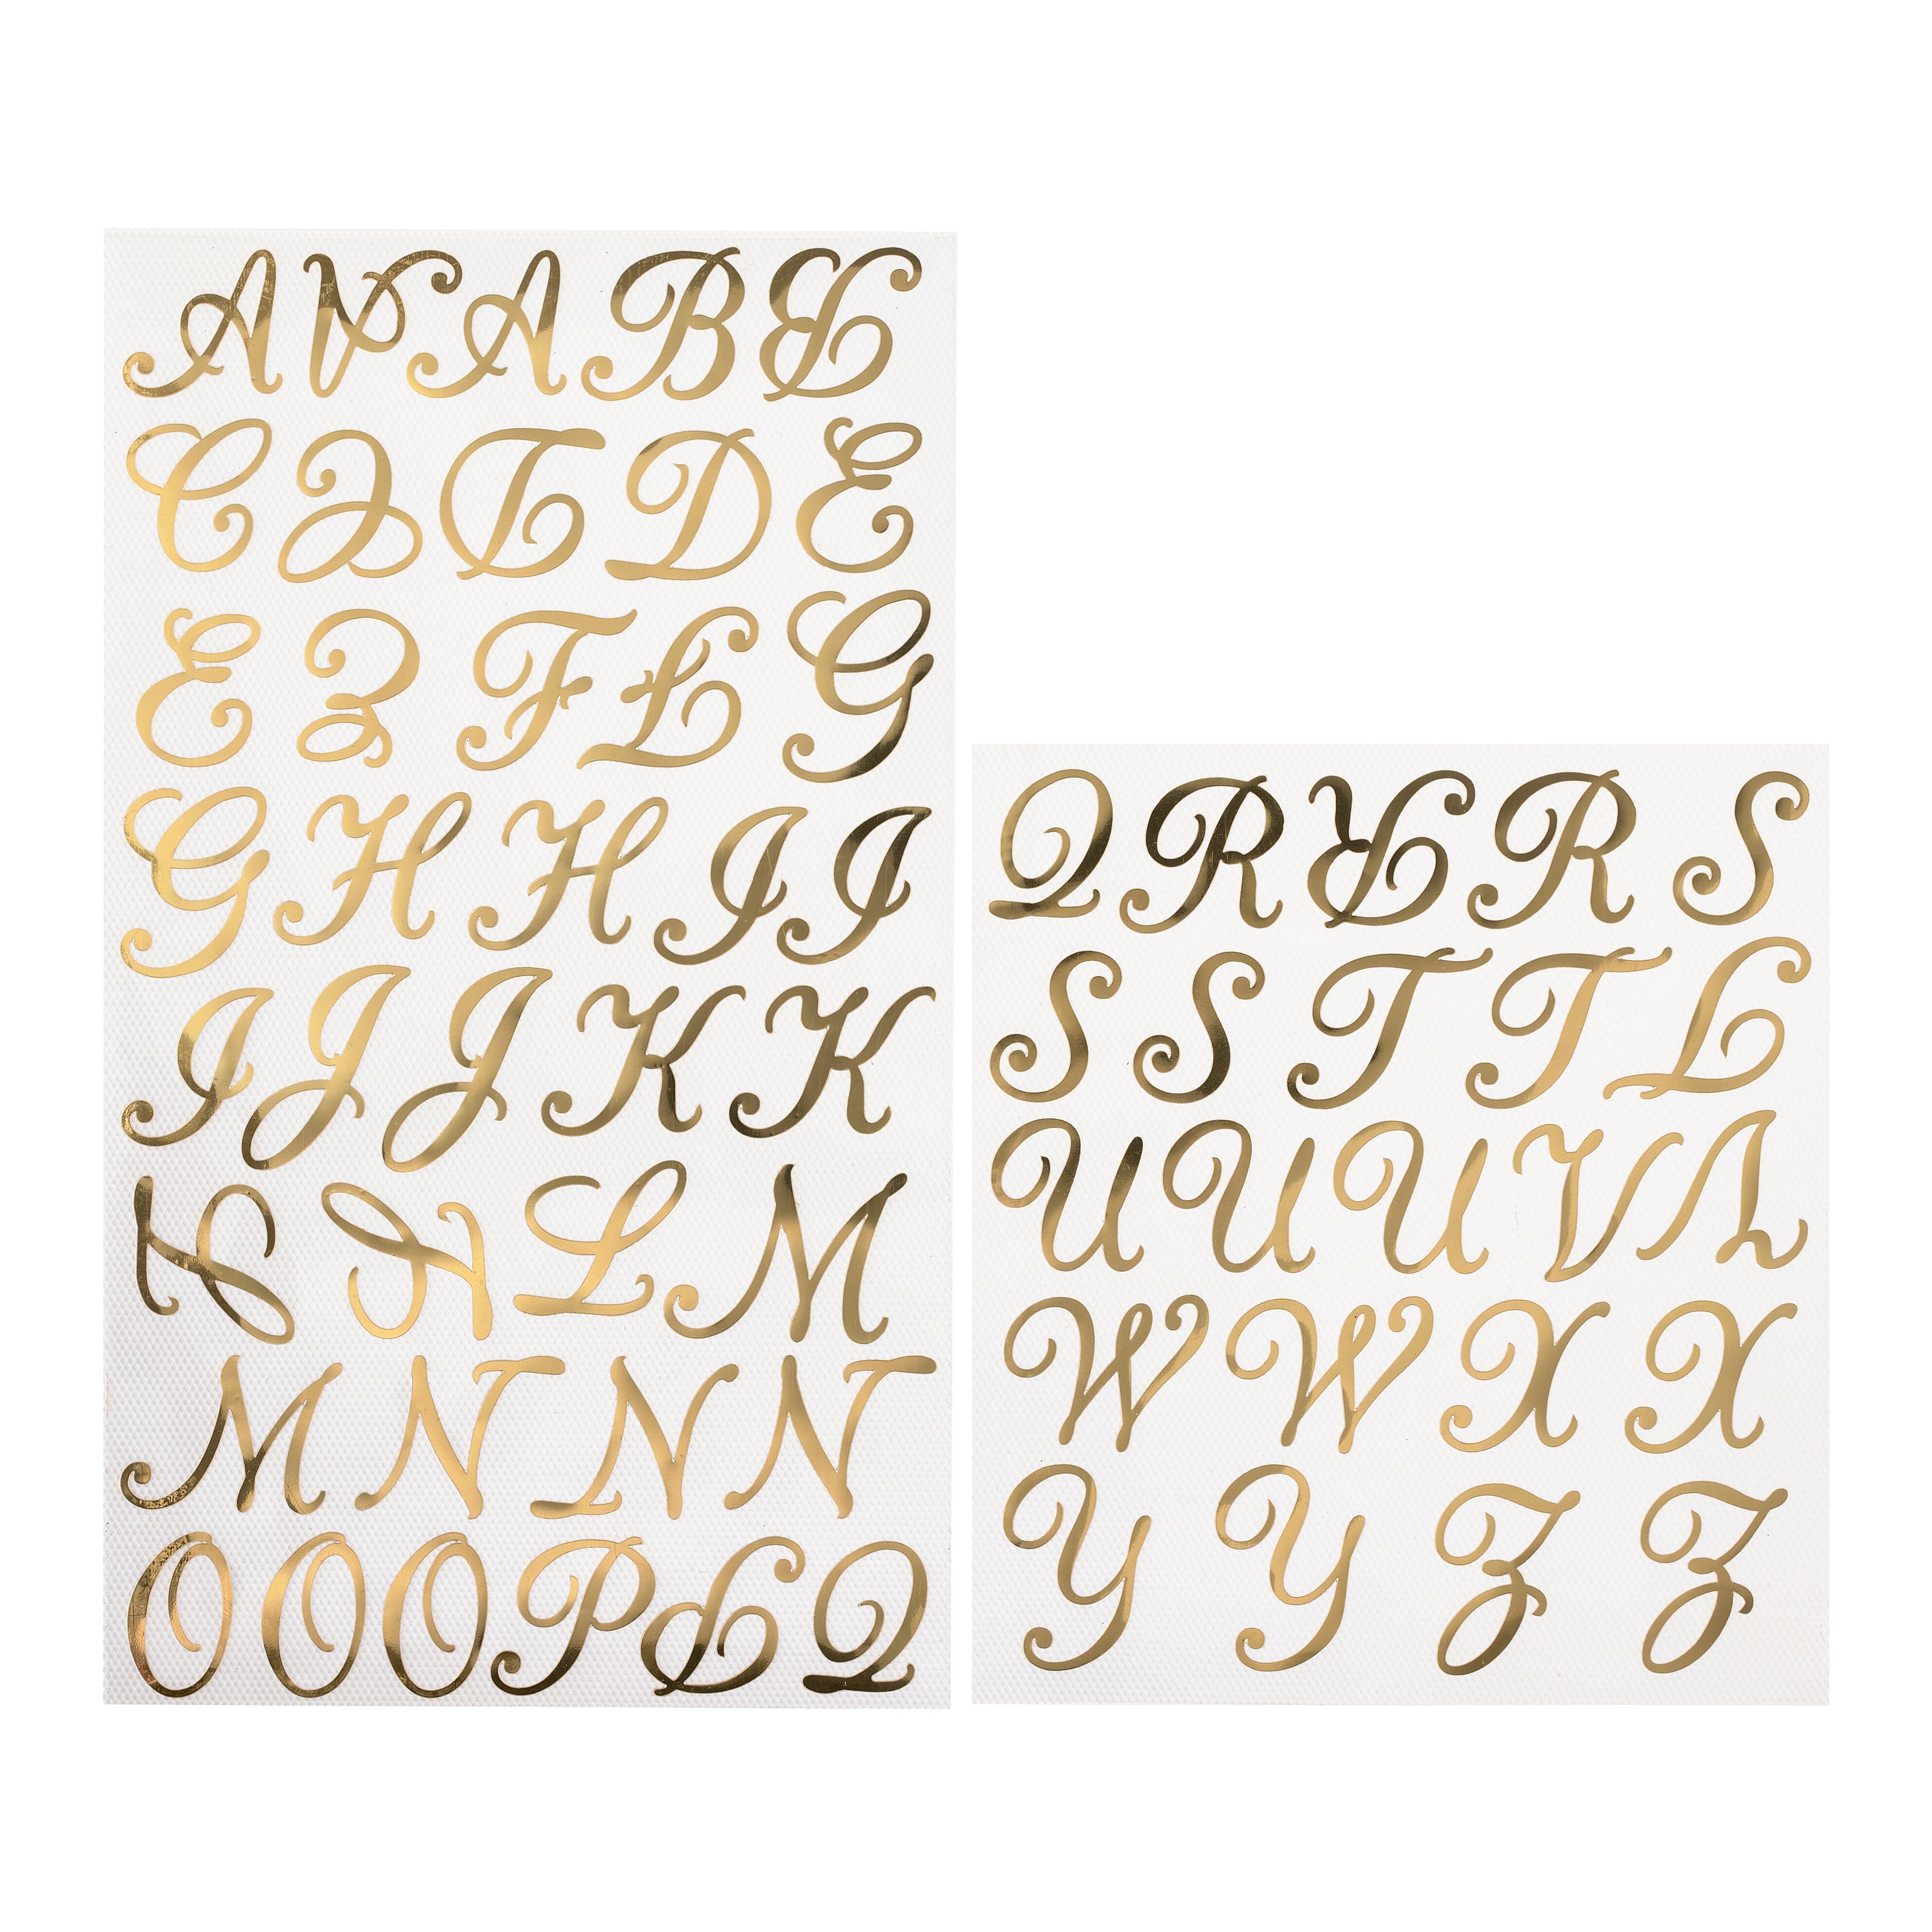 Iron On Gold Stud Letters All Capital Letters 26 Pcs. Creative Craft Idea  New